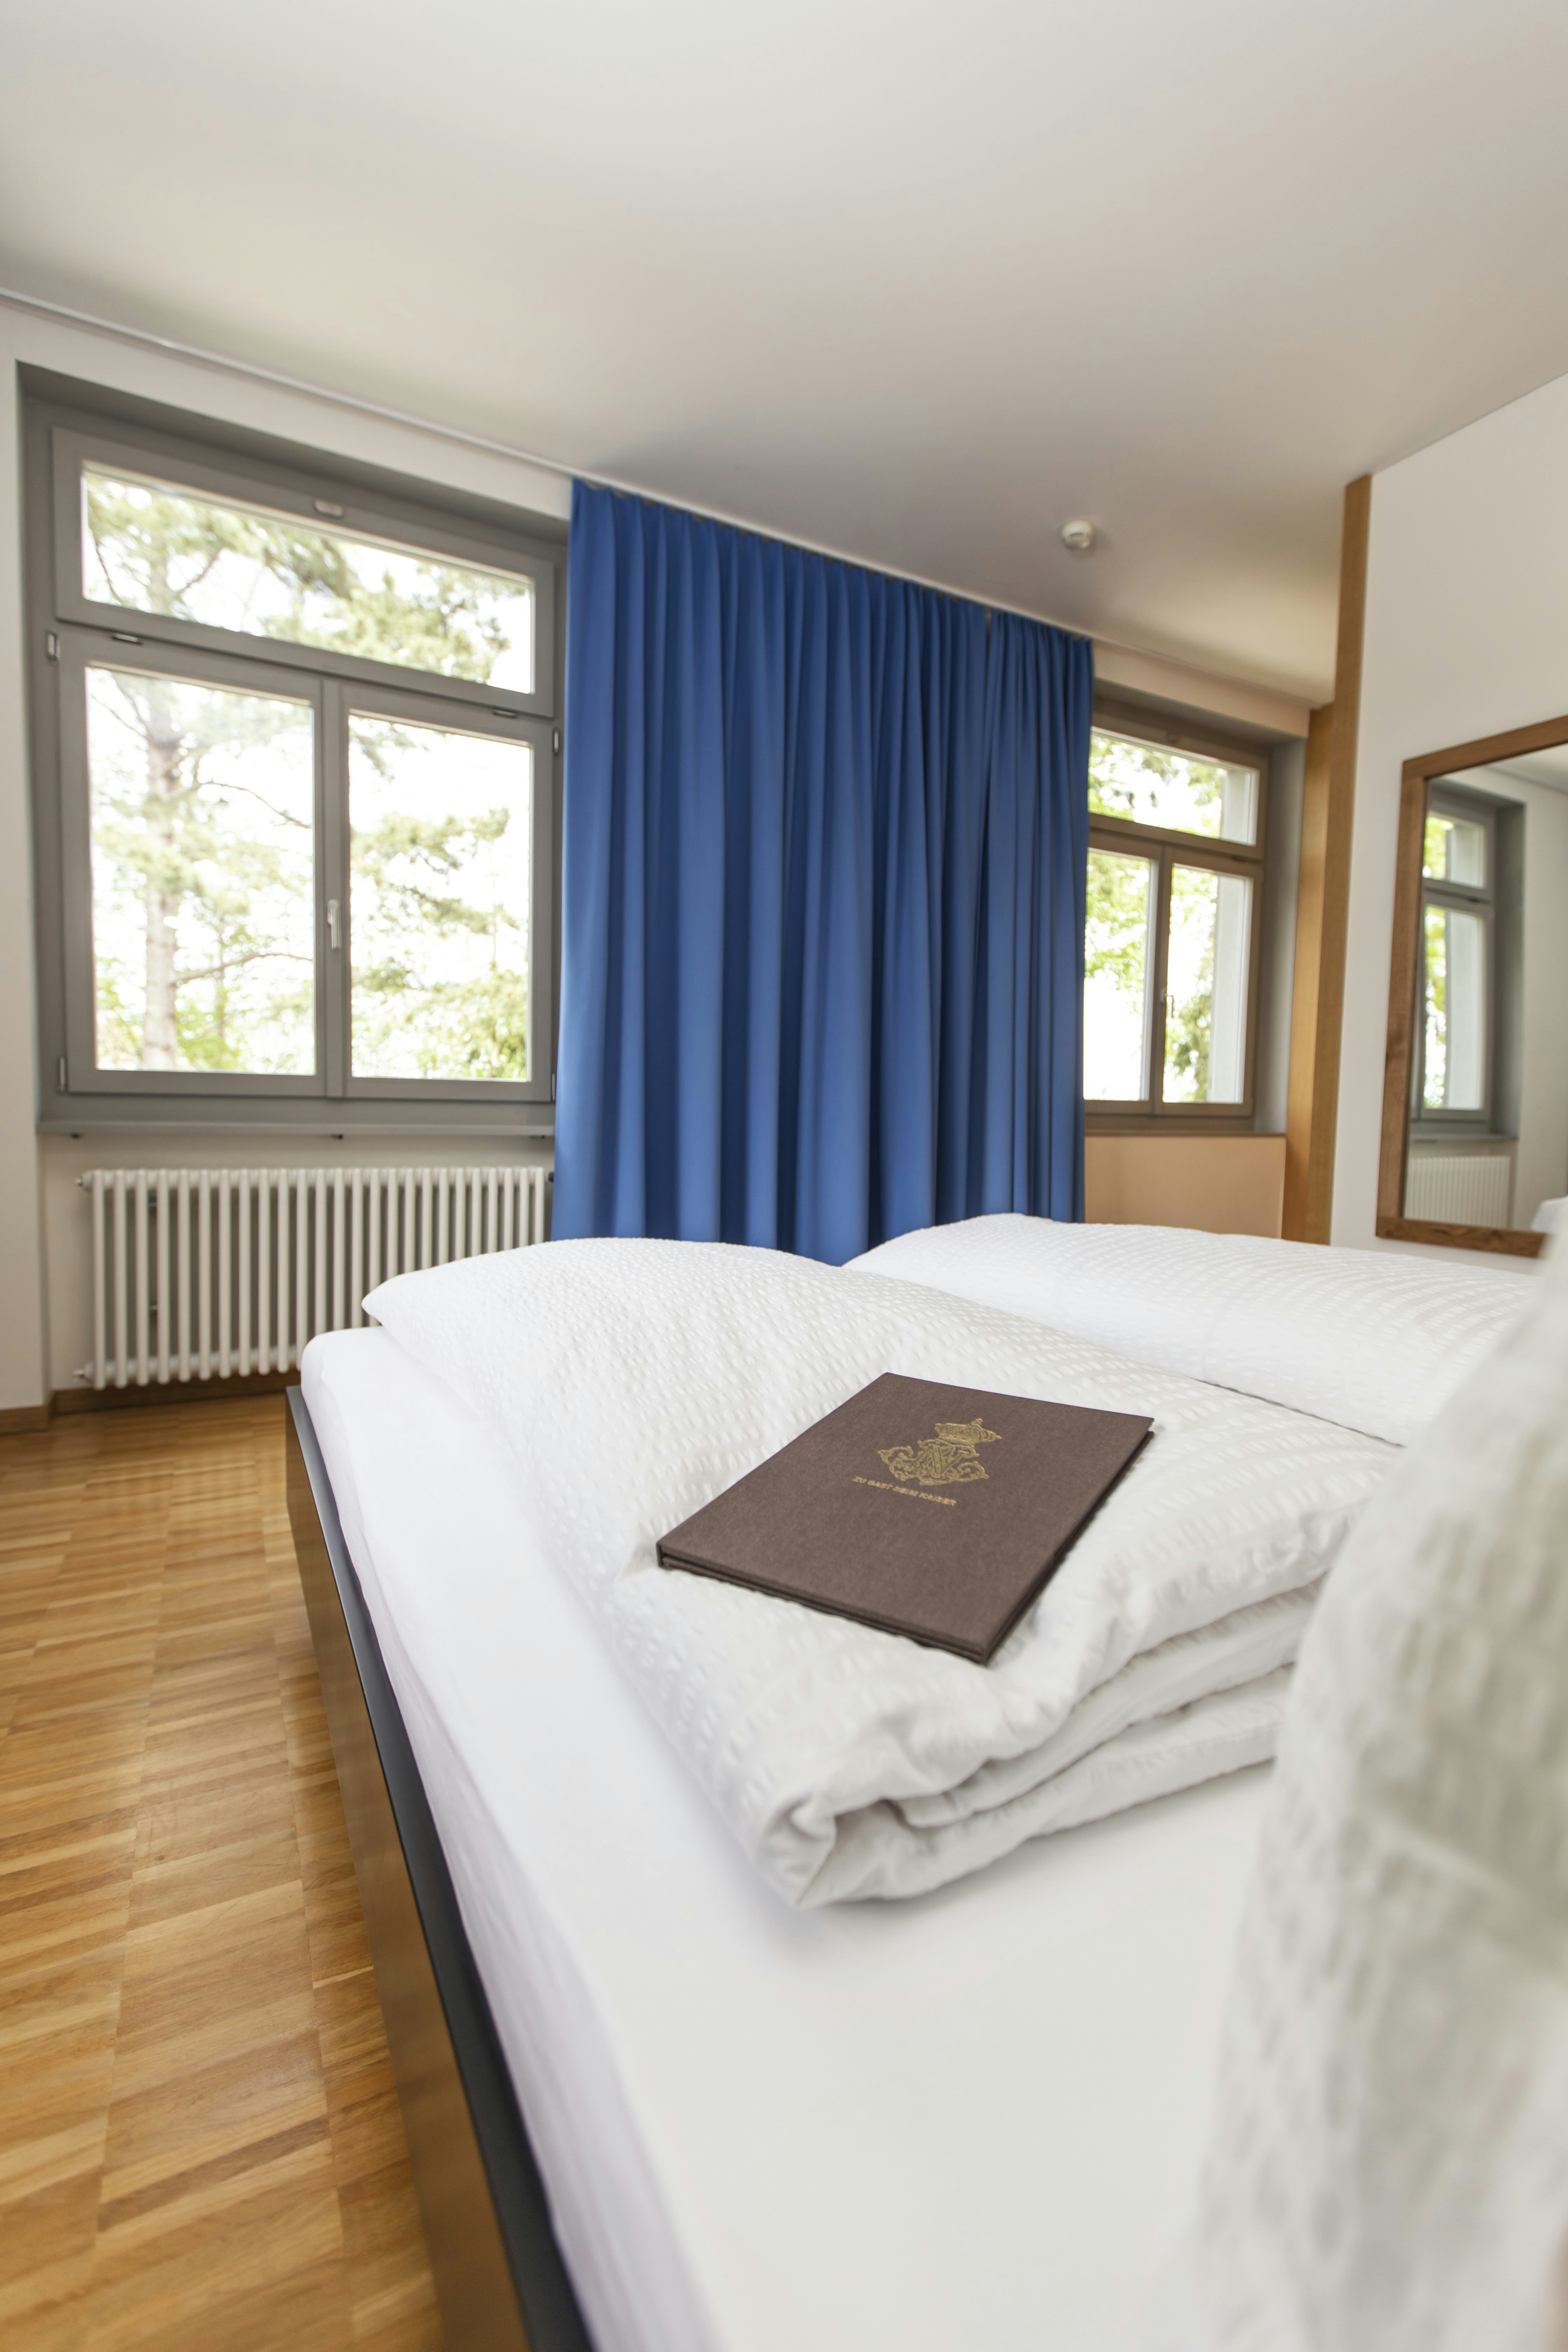 Stay overnight at the Hotel Arenenberg